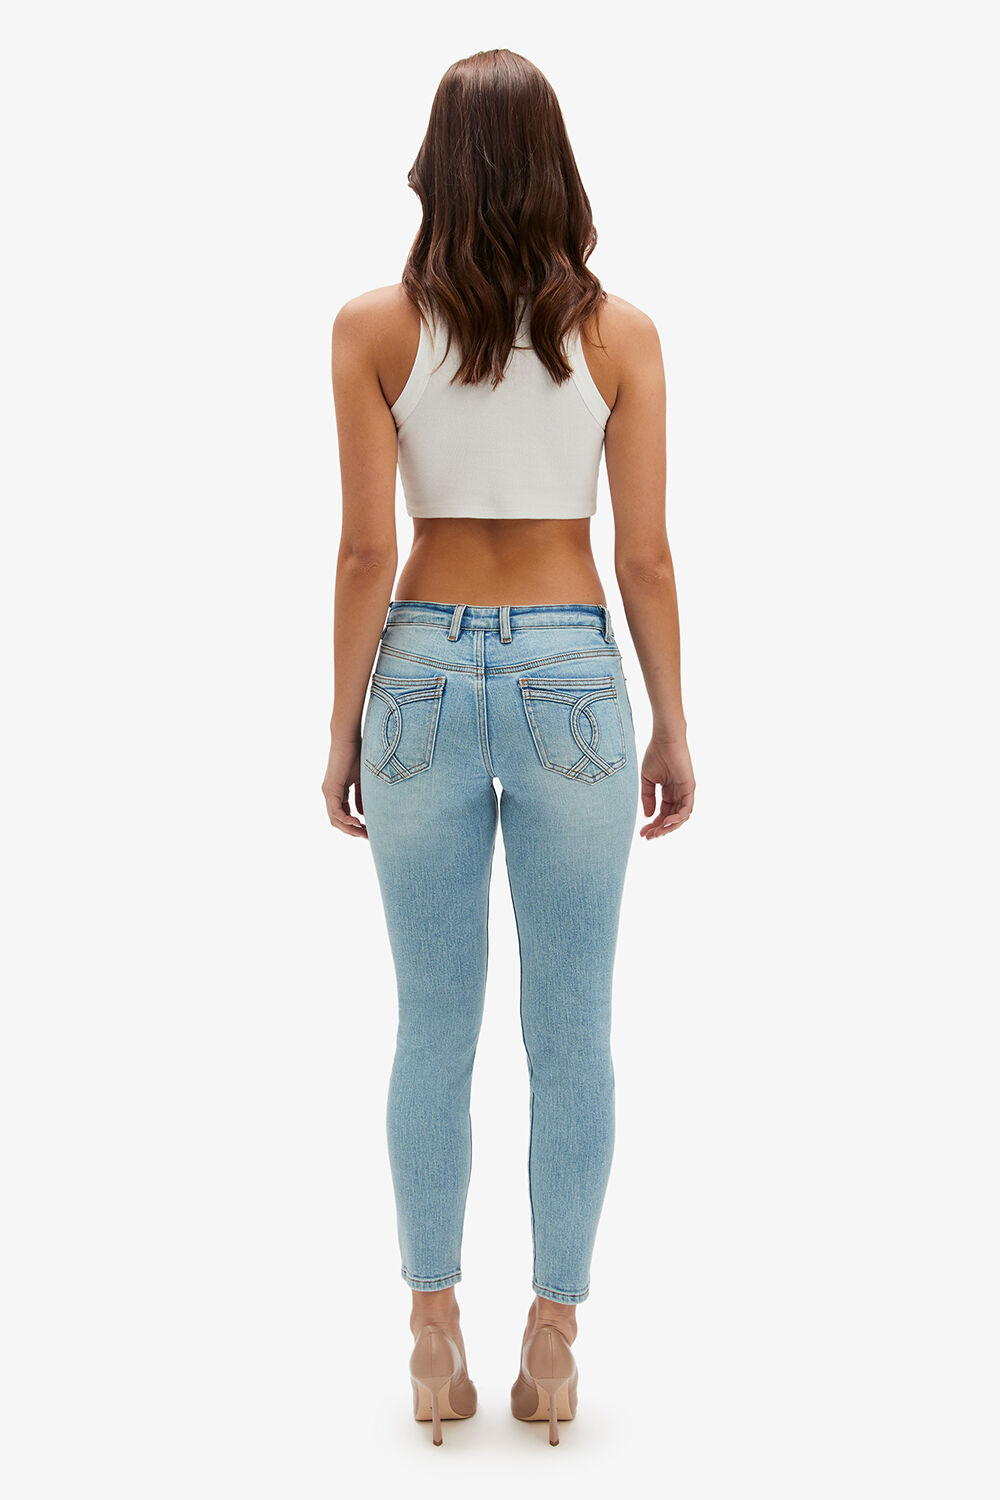 KATE LOW RISE JEAN in colour NIGHTSHADOW BLUE